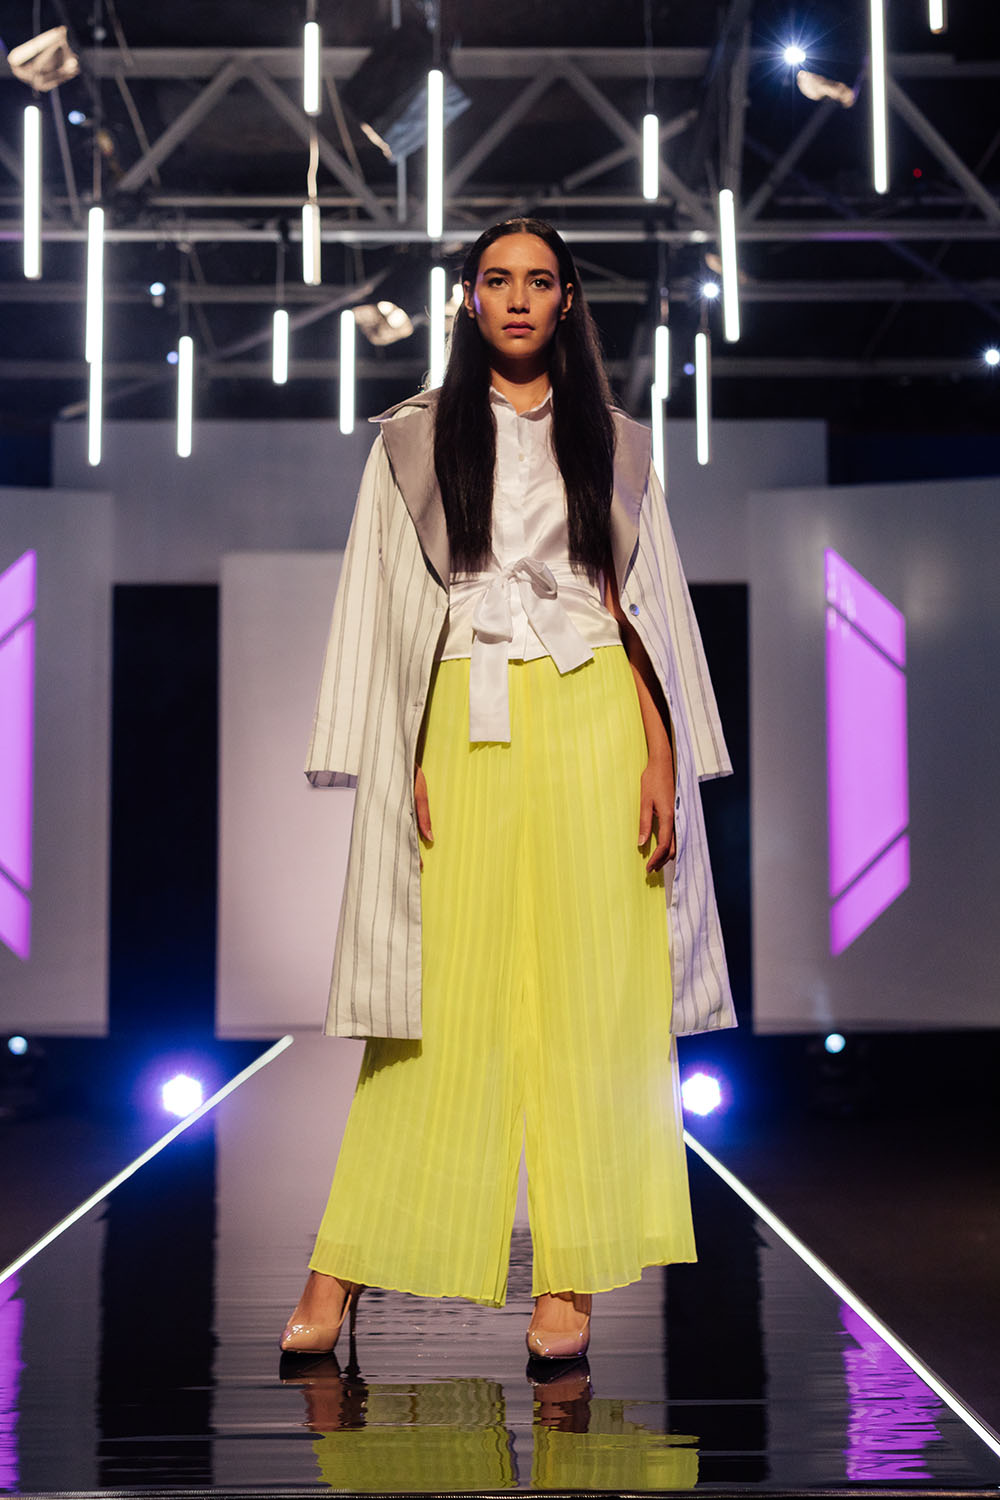 Kerry Neon yellow sweetheart dress with pleated chiffon skirt (which formed the basis of his wide-legged trousers), sleeveless white collared shirt with tie through the waist, white pinstripe coat with silver lapel. Judges’ comments: Sally-Ann: “This missed the mark…I don’t know about the tie-front waist, I wished you’d done something a little more fashion forward on the top half.” Robert: “You could have been more innovative with the colour choice” Benny: “It’s pedestrian.” Georgia: “When you’ve got something this crazy, why not play it up rather than tone it down?”